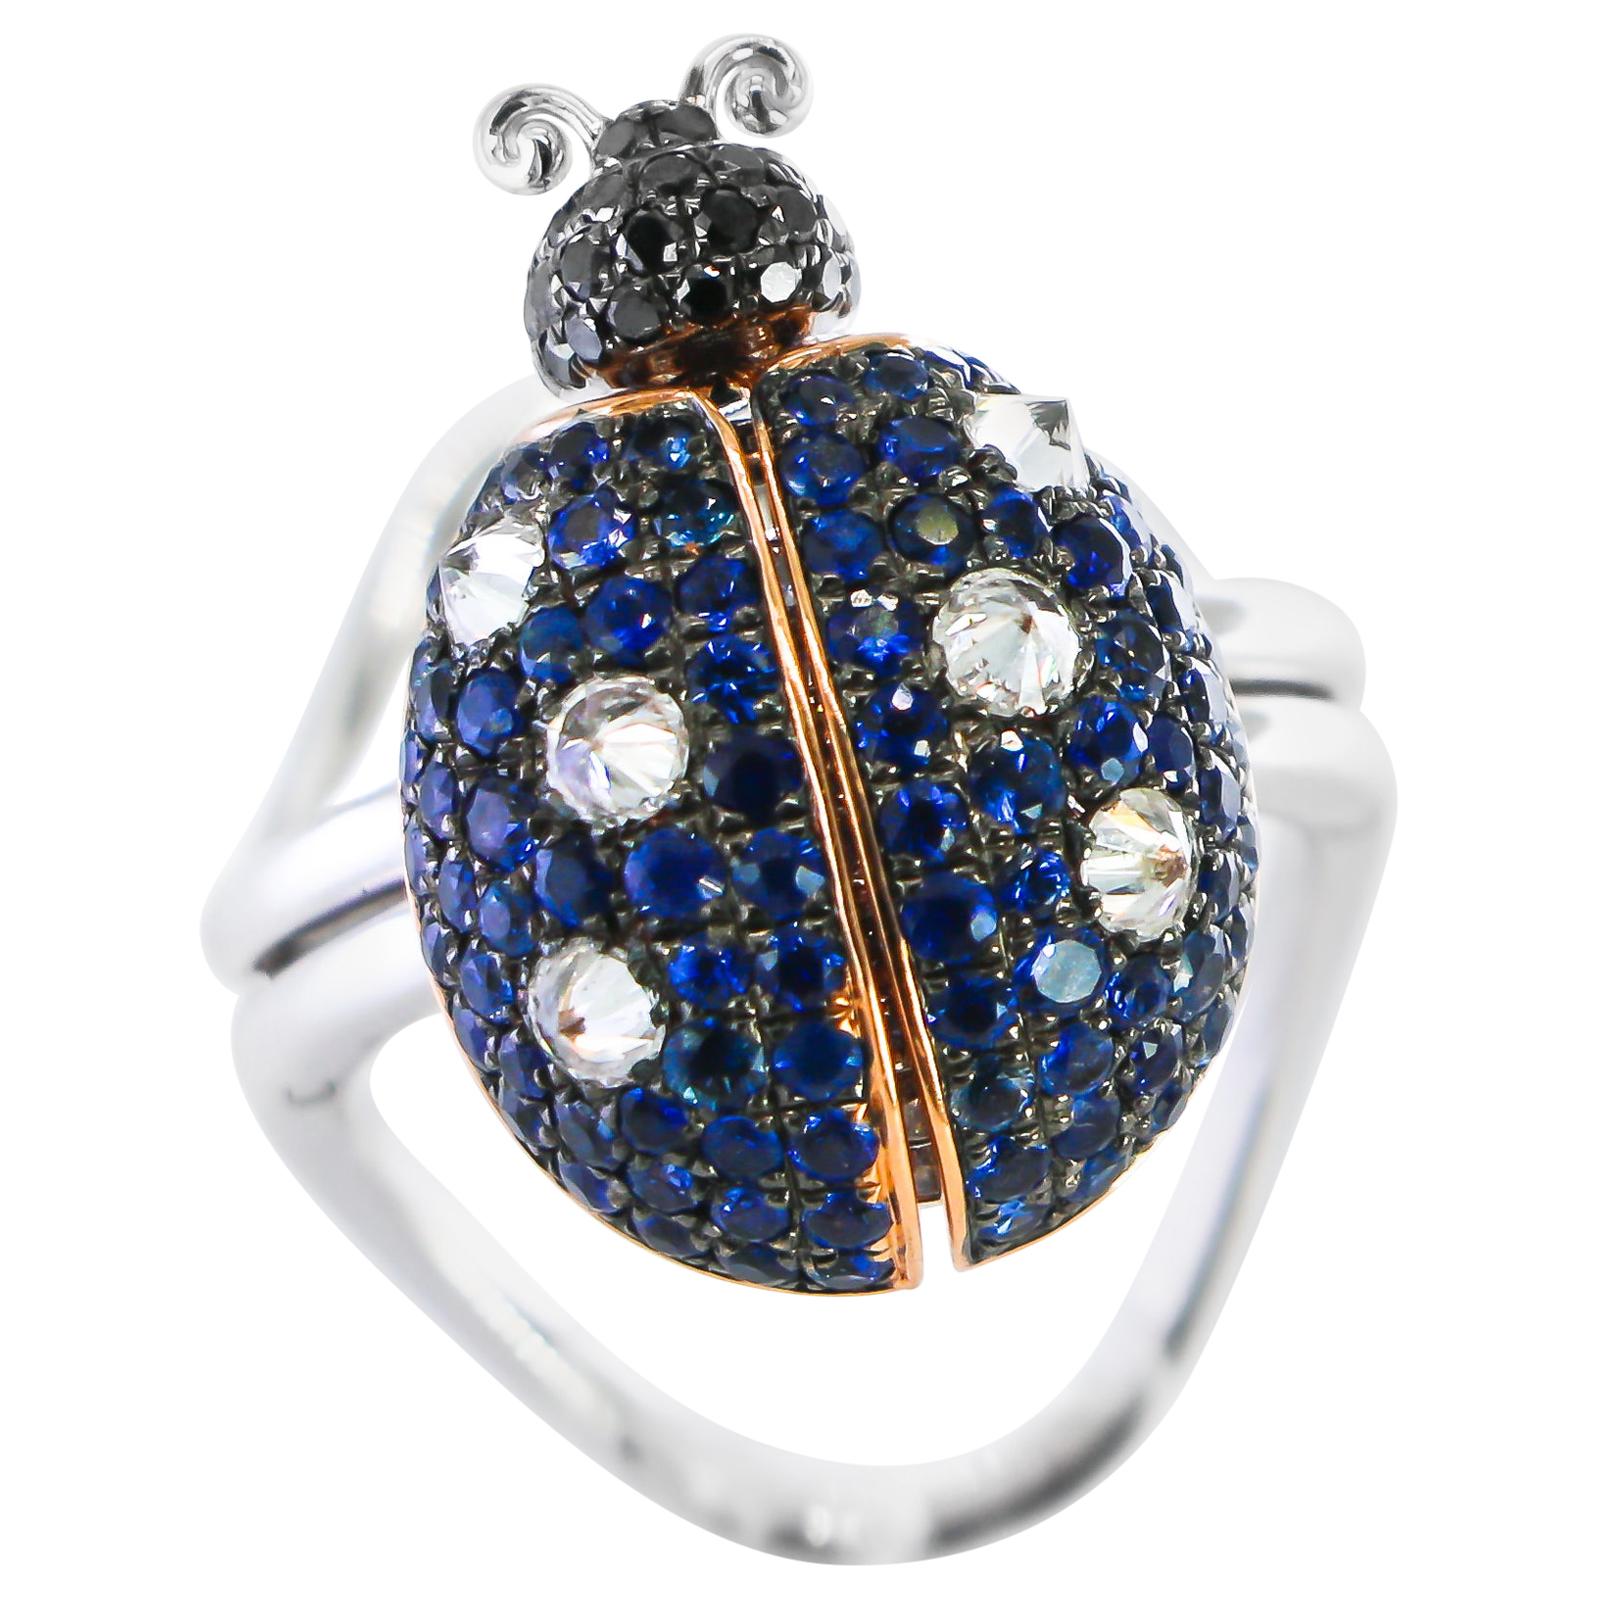 Ladybug Ring with Moving Parts Sapphires 1.73 Carat and Diamonds 1.18 Carat